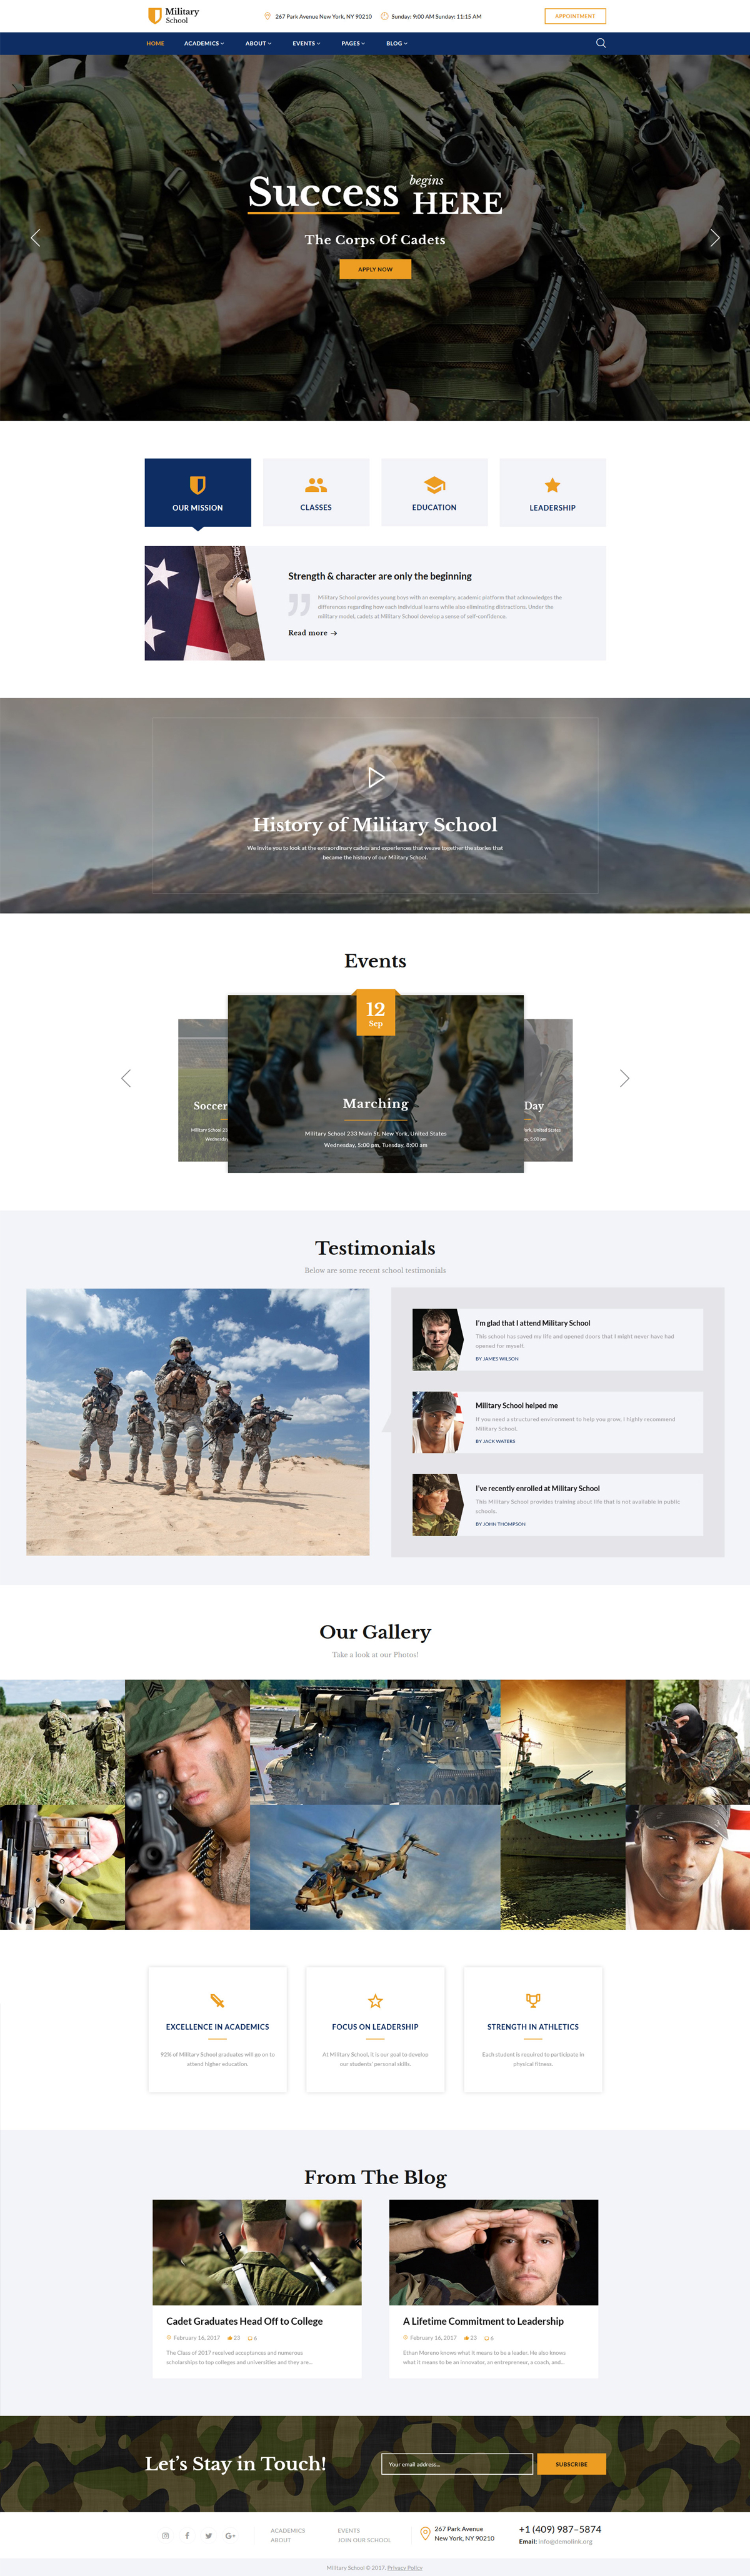 Military School Multipage Website Template